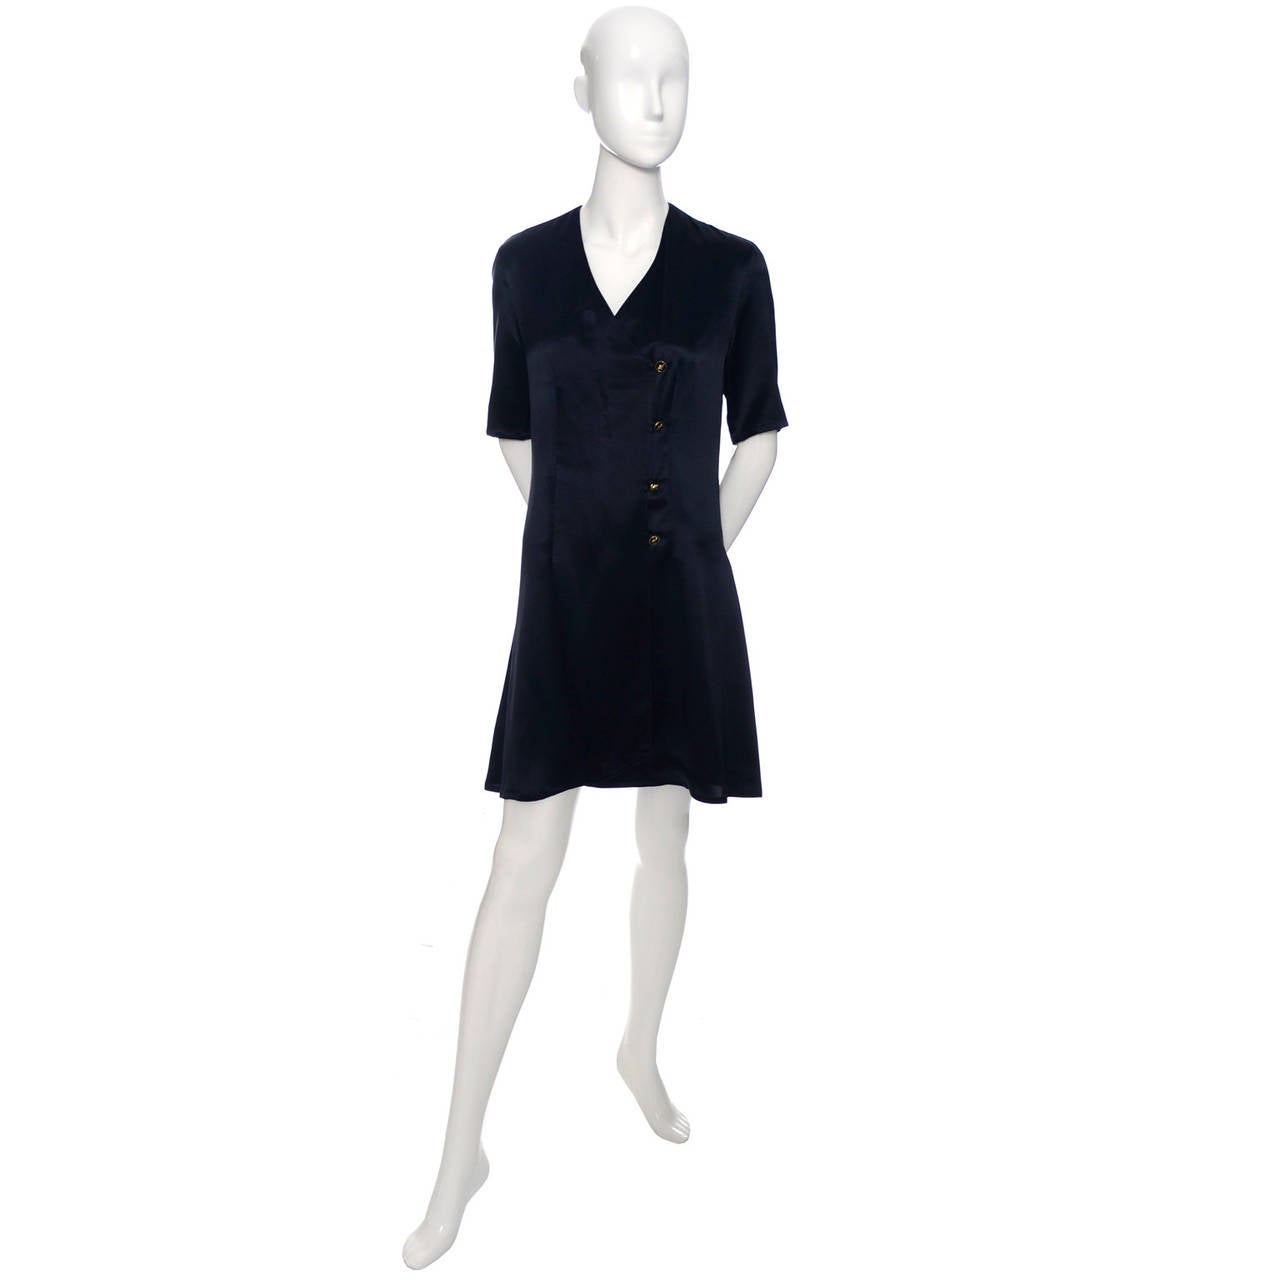 Black New Salvatore Ferragamo Vintage Silk Minimalist Dress With Shoe Buttons With Tag